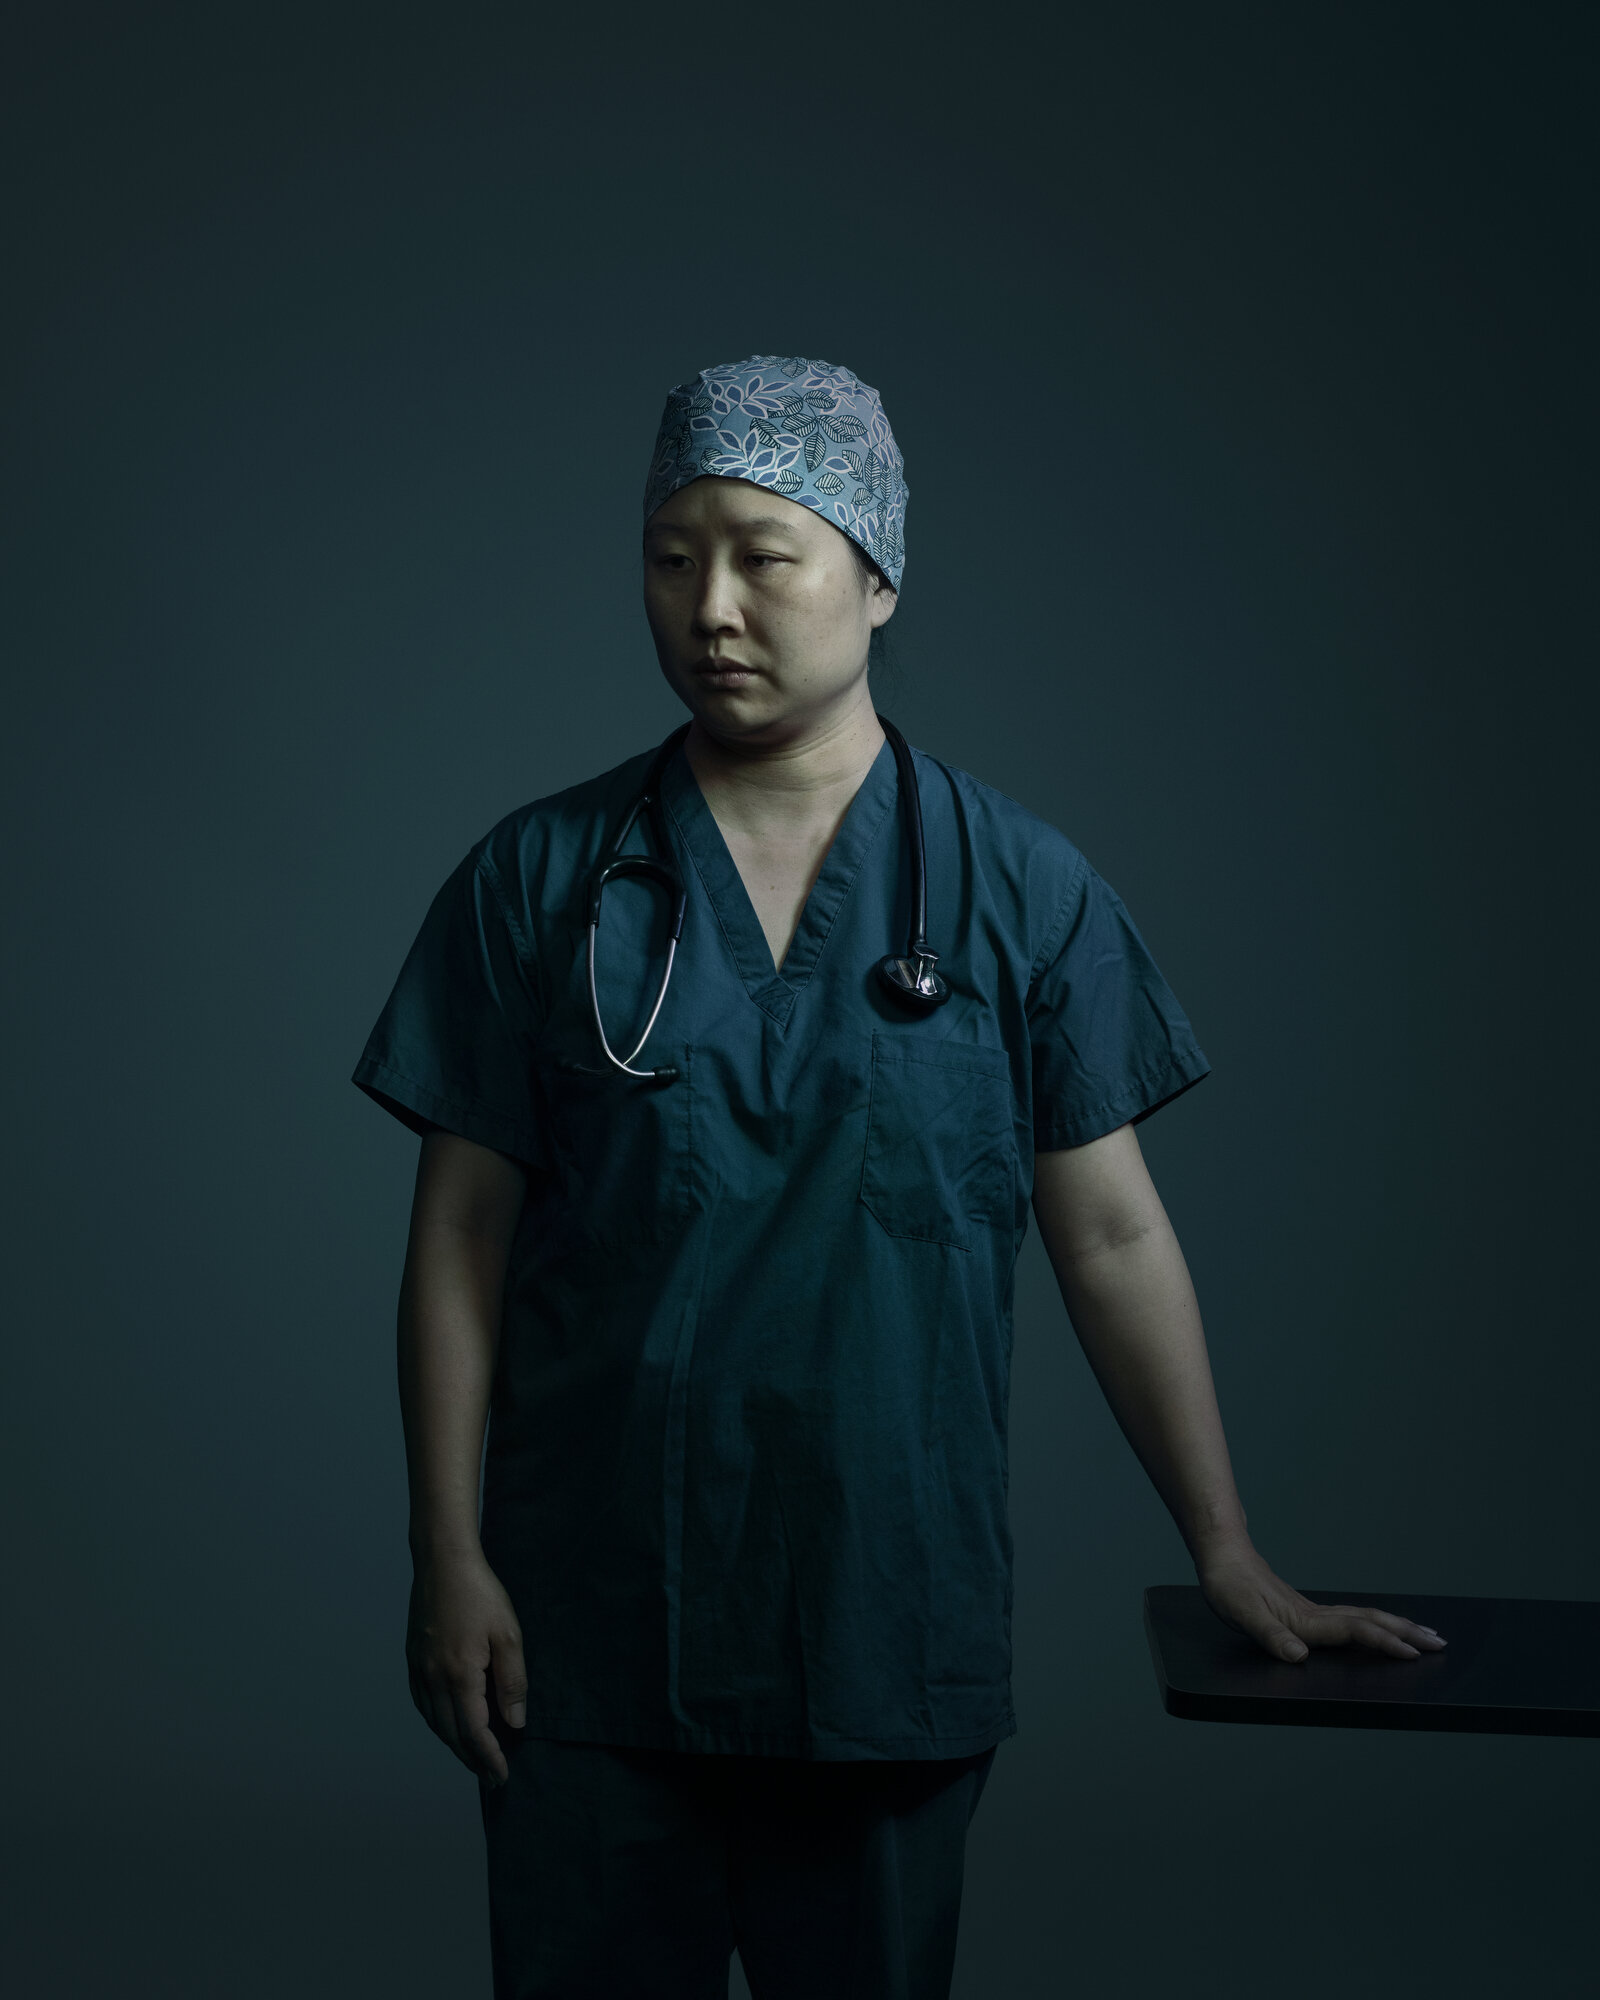  Dr. Stella Hahn, Covid-19 frontline worker, Long Island Jewish Medical Center, New York for  The New York Times Magazine  